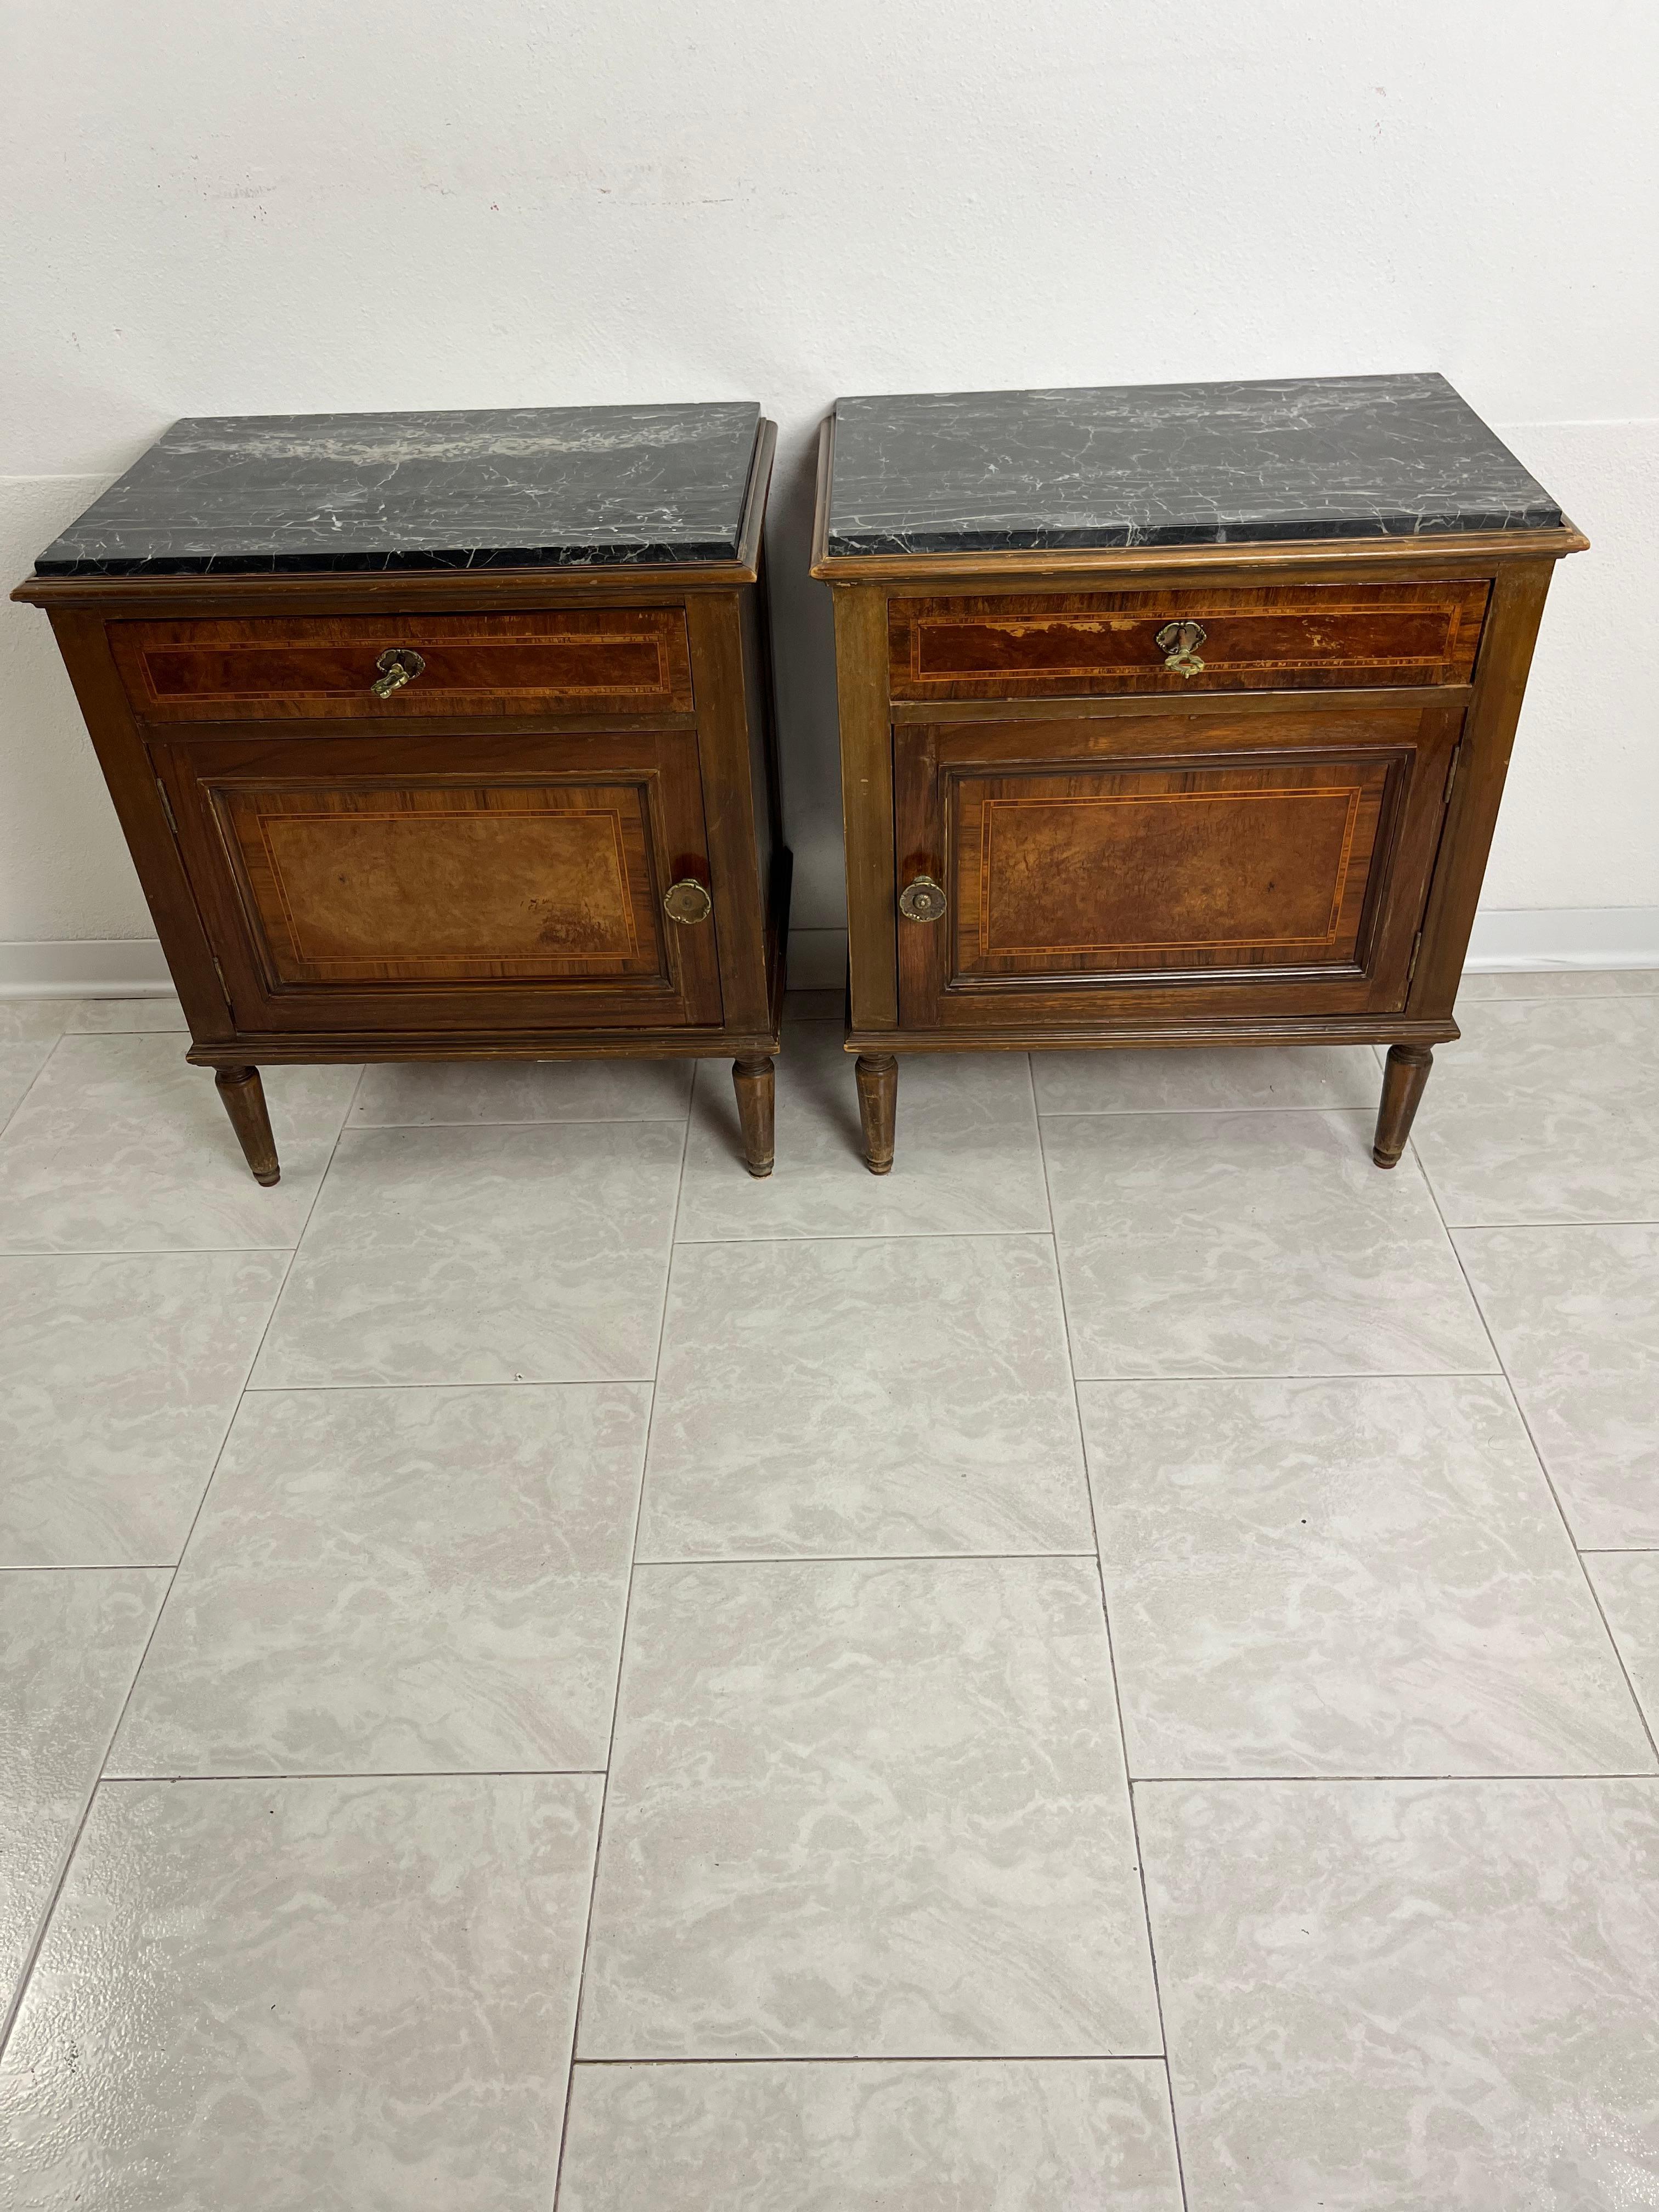 Set of 2 Mid-Century Italian bedside tables in wood and fine marble top, 1960s.
Equipped with door and drawer. Brass feet. Intact and in good condition, small signs of aging.

We guarantee adequate packaging and will ship via DHL, insuring the